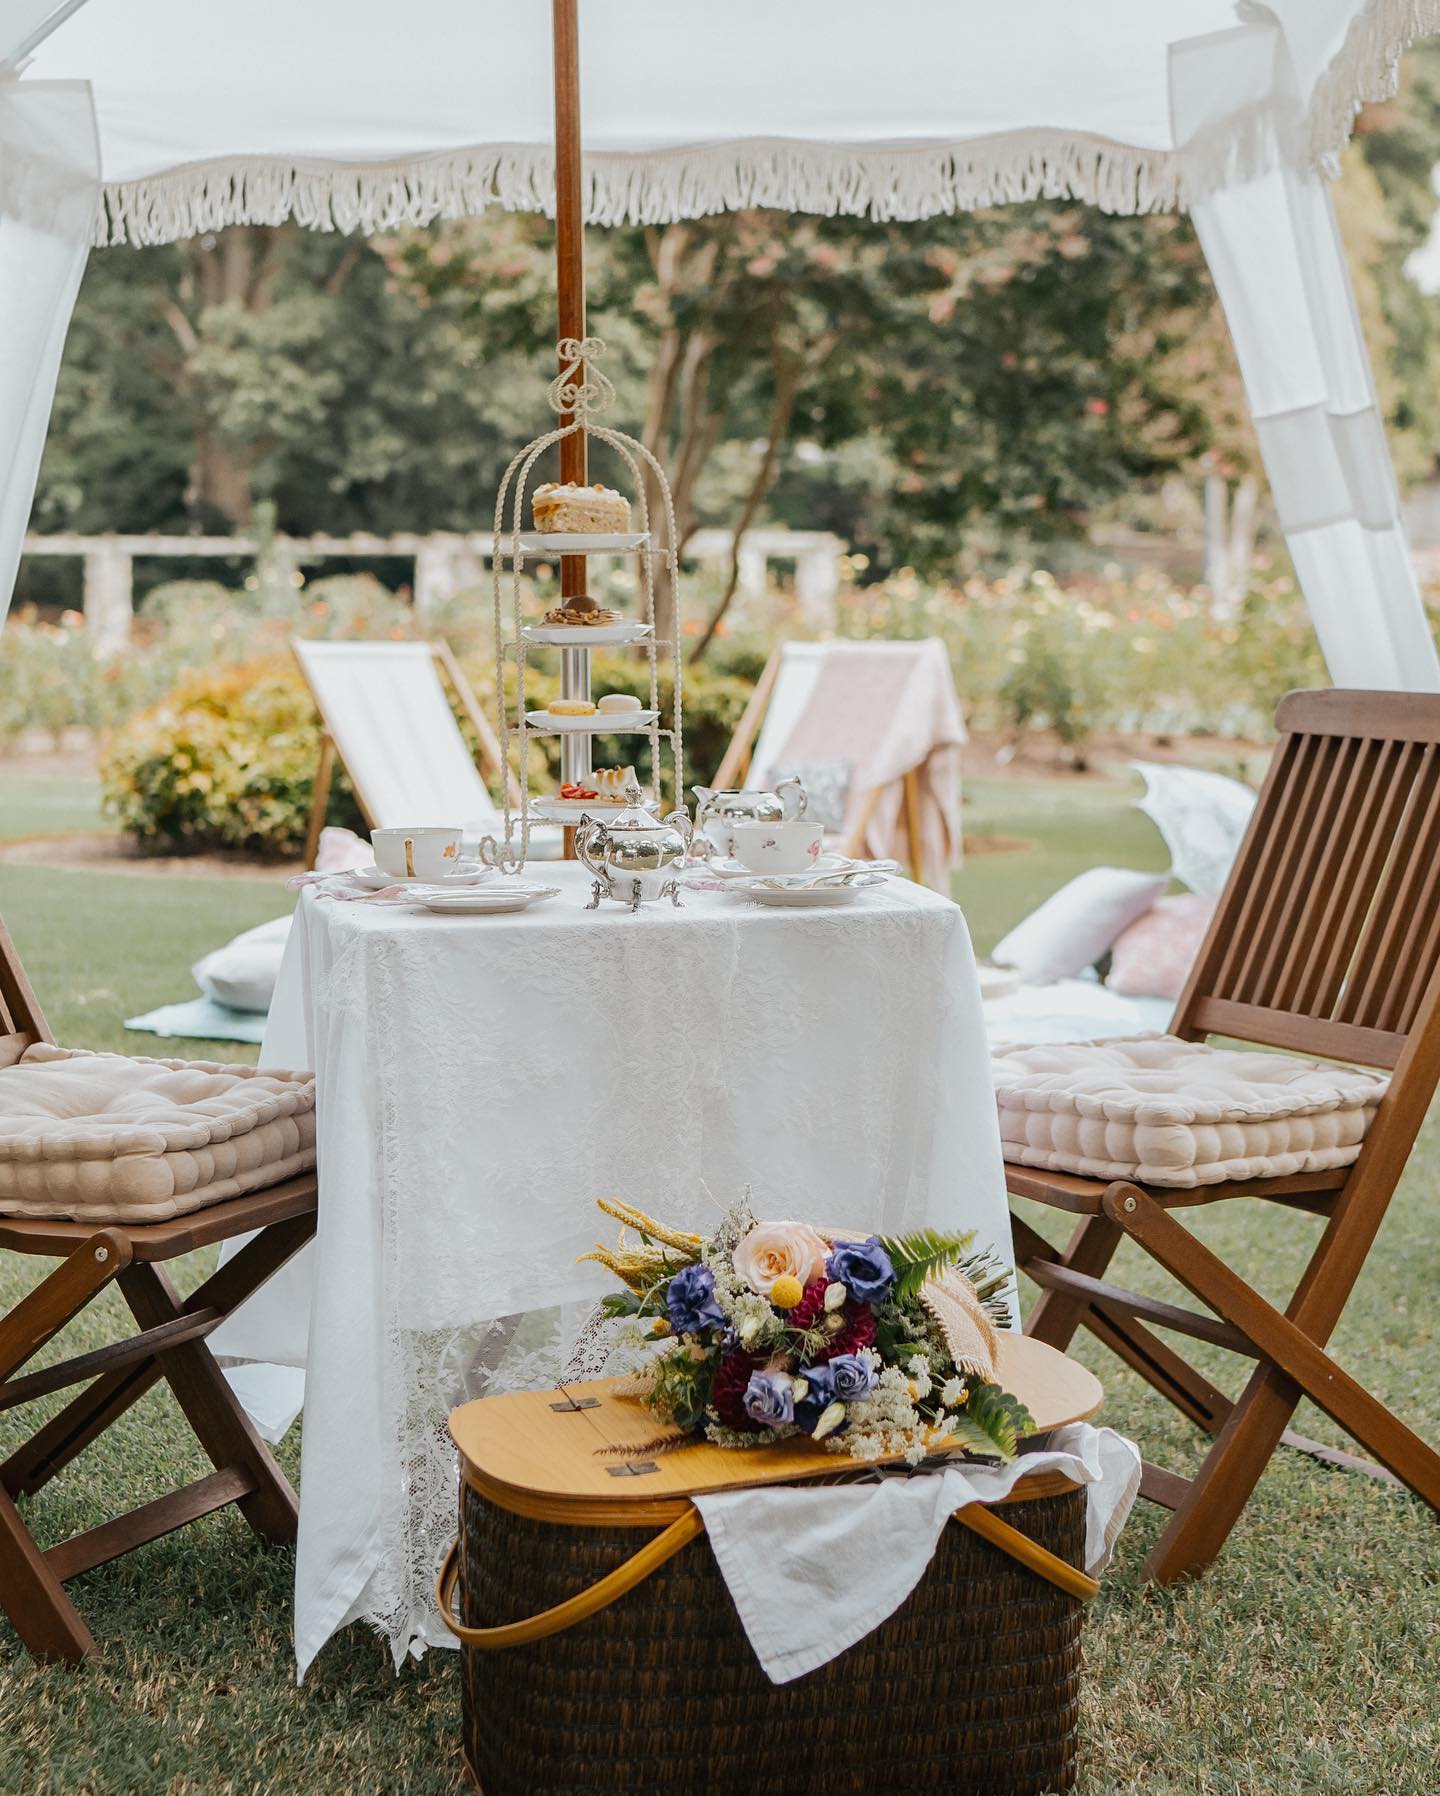 A lovely tea party for a lovely couple! 

Still can't get over these images captured by Luisa. 

Tea party picnics are a